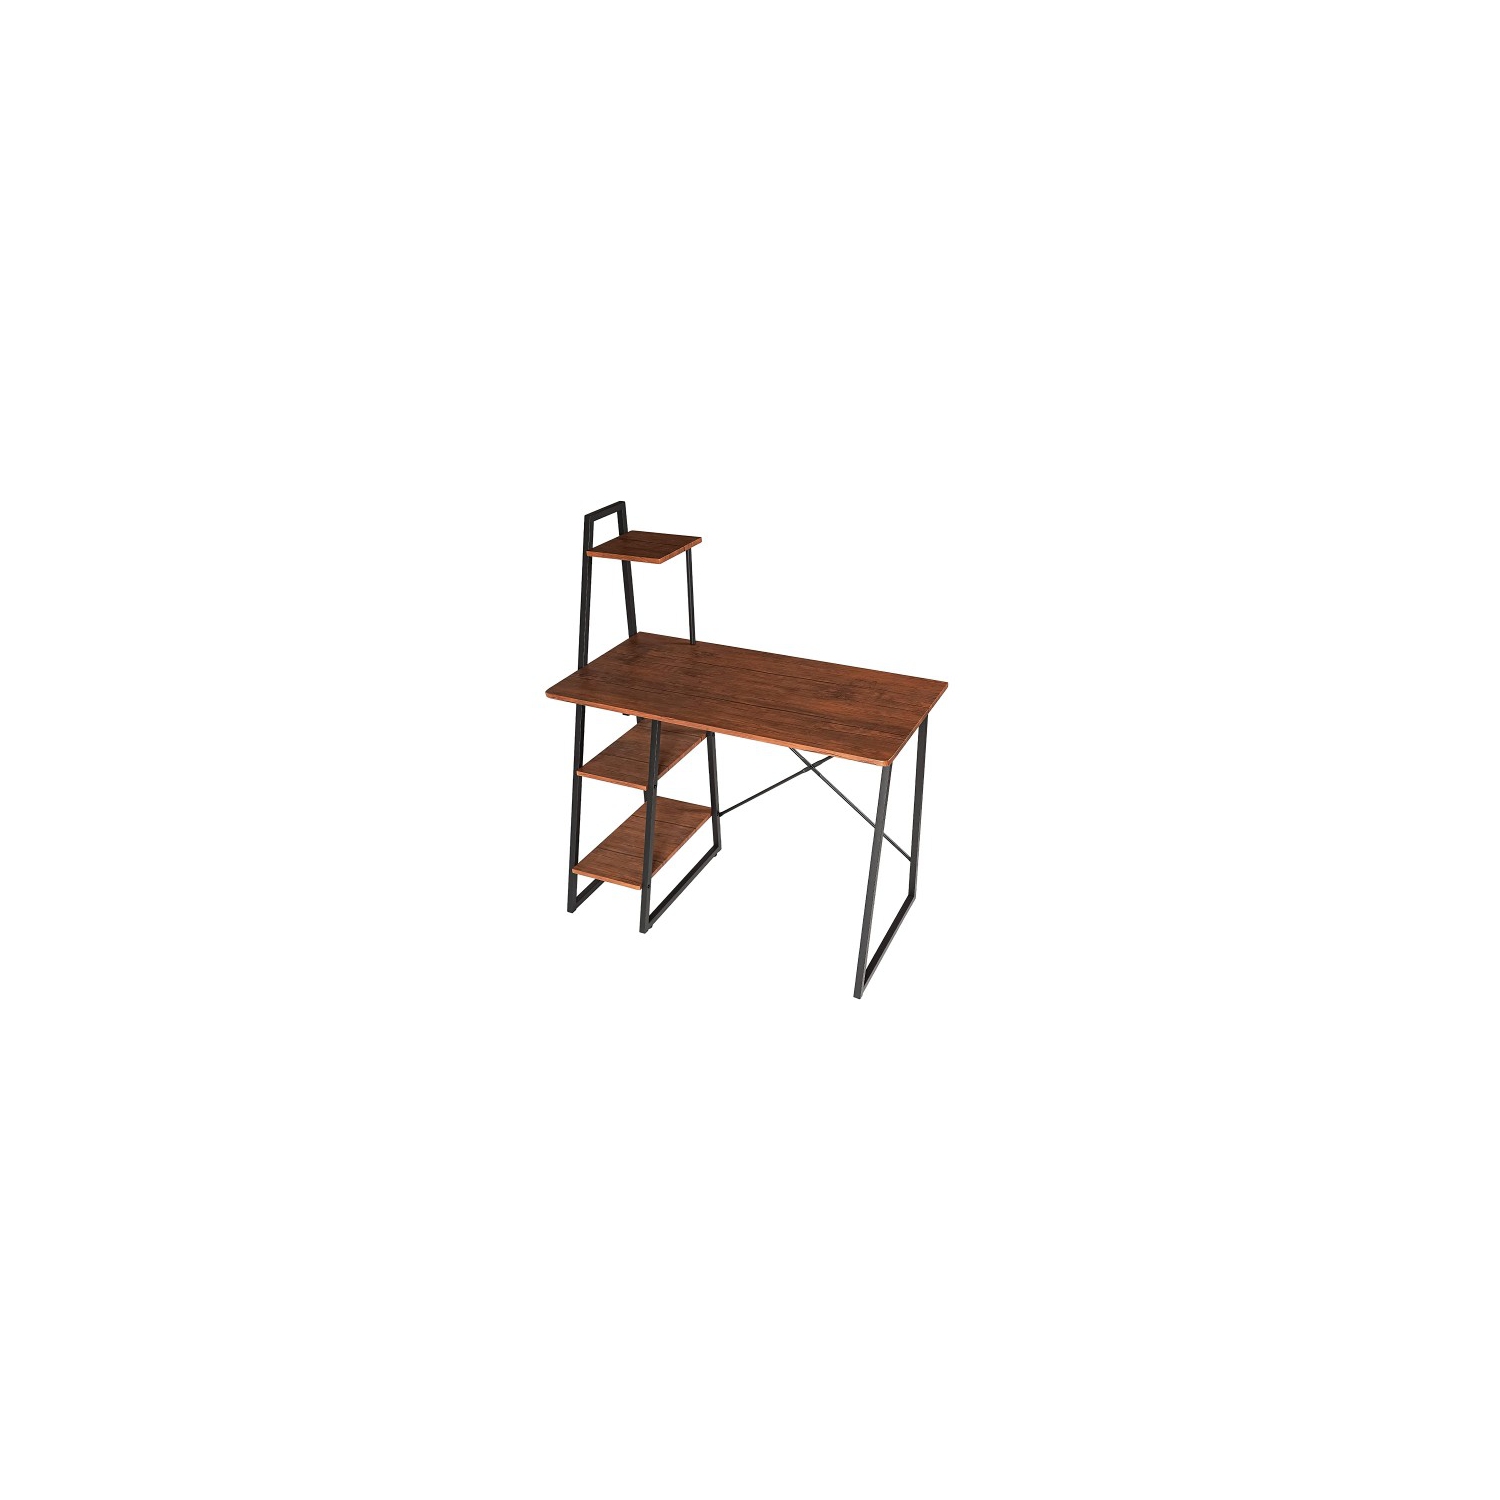 Compact Study Desk, 102 x 50cm Small Multipurpose Desk with 4 Tier Shelves, Industrial Wood, Metal Frame for Home, Office, Small Spaces